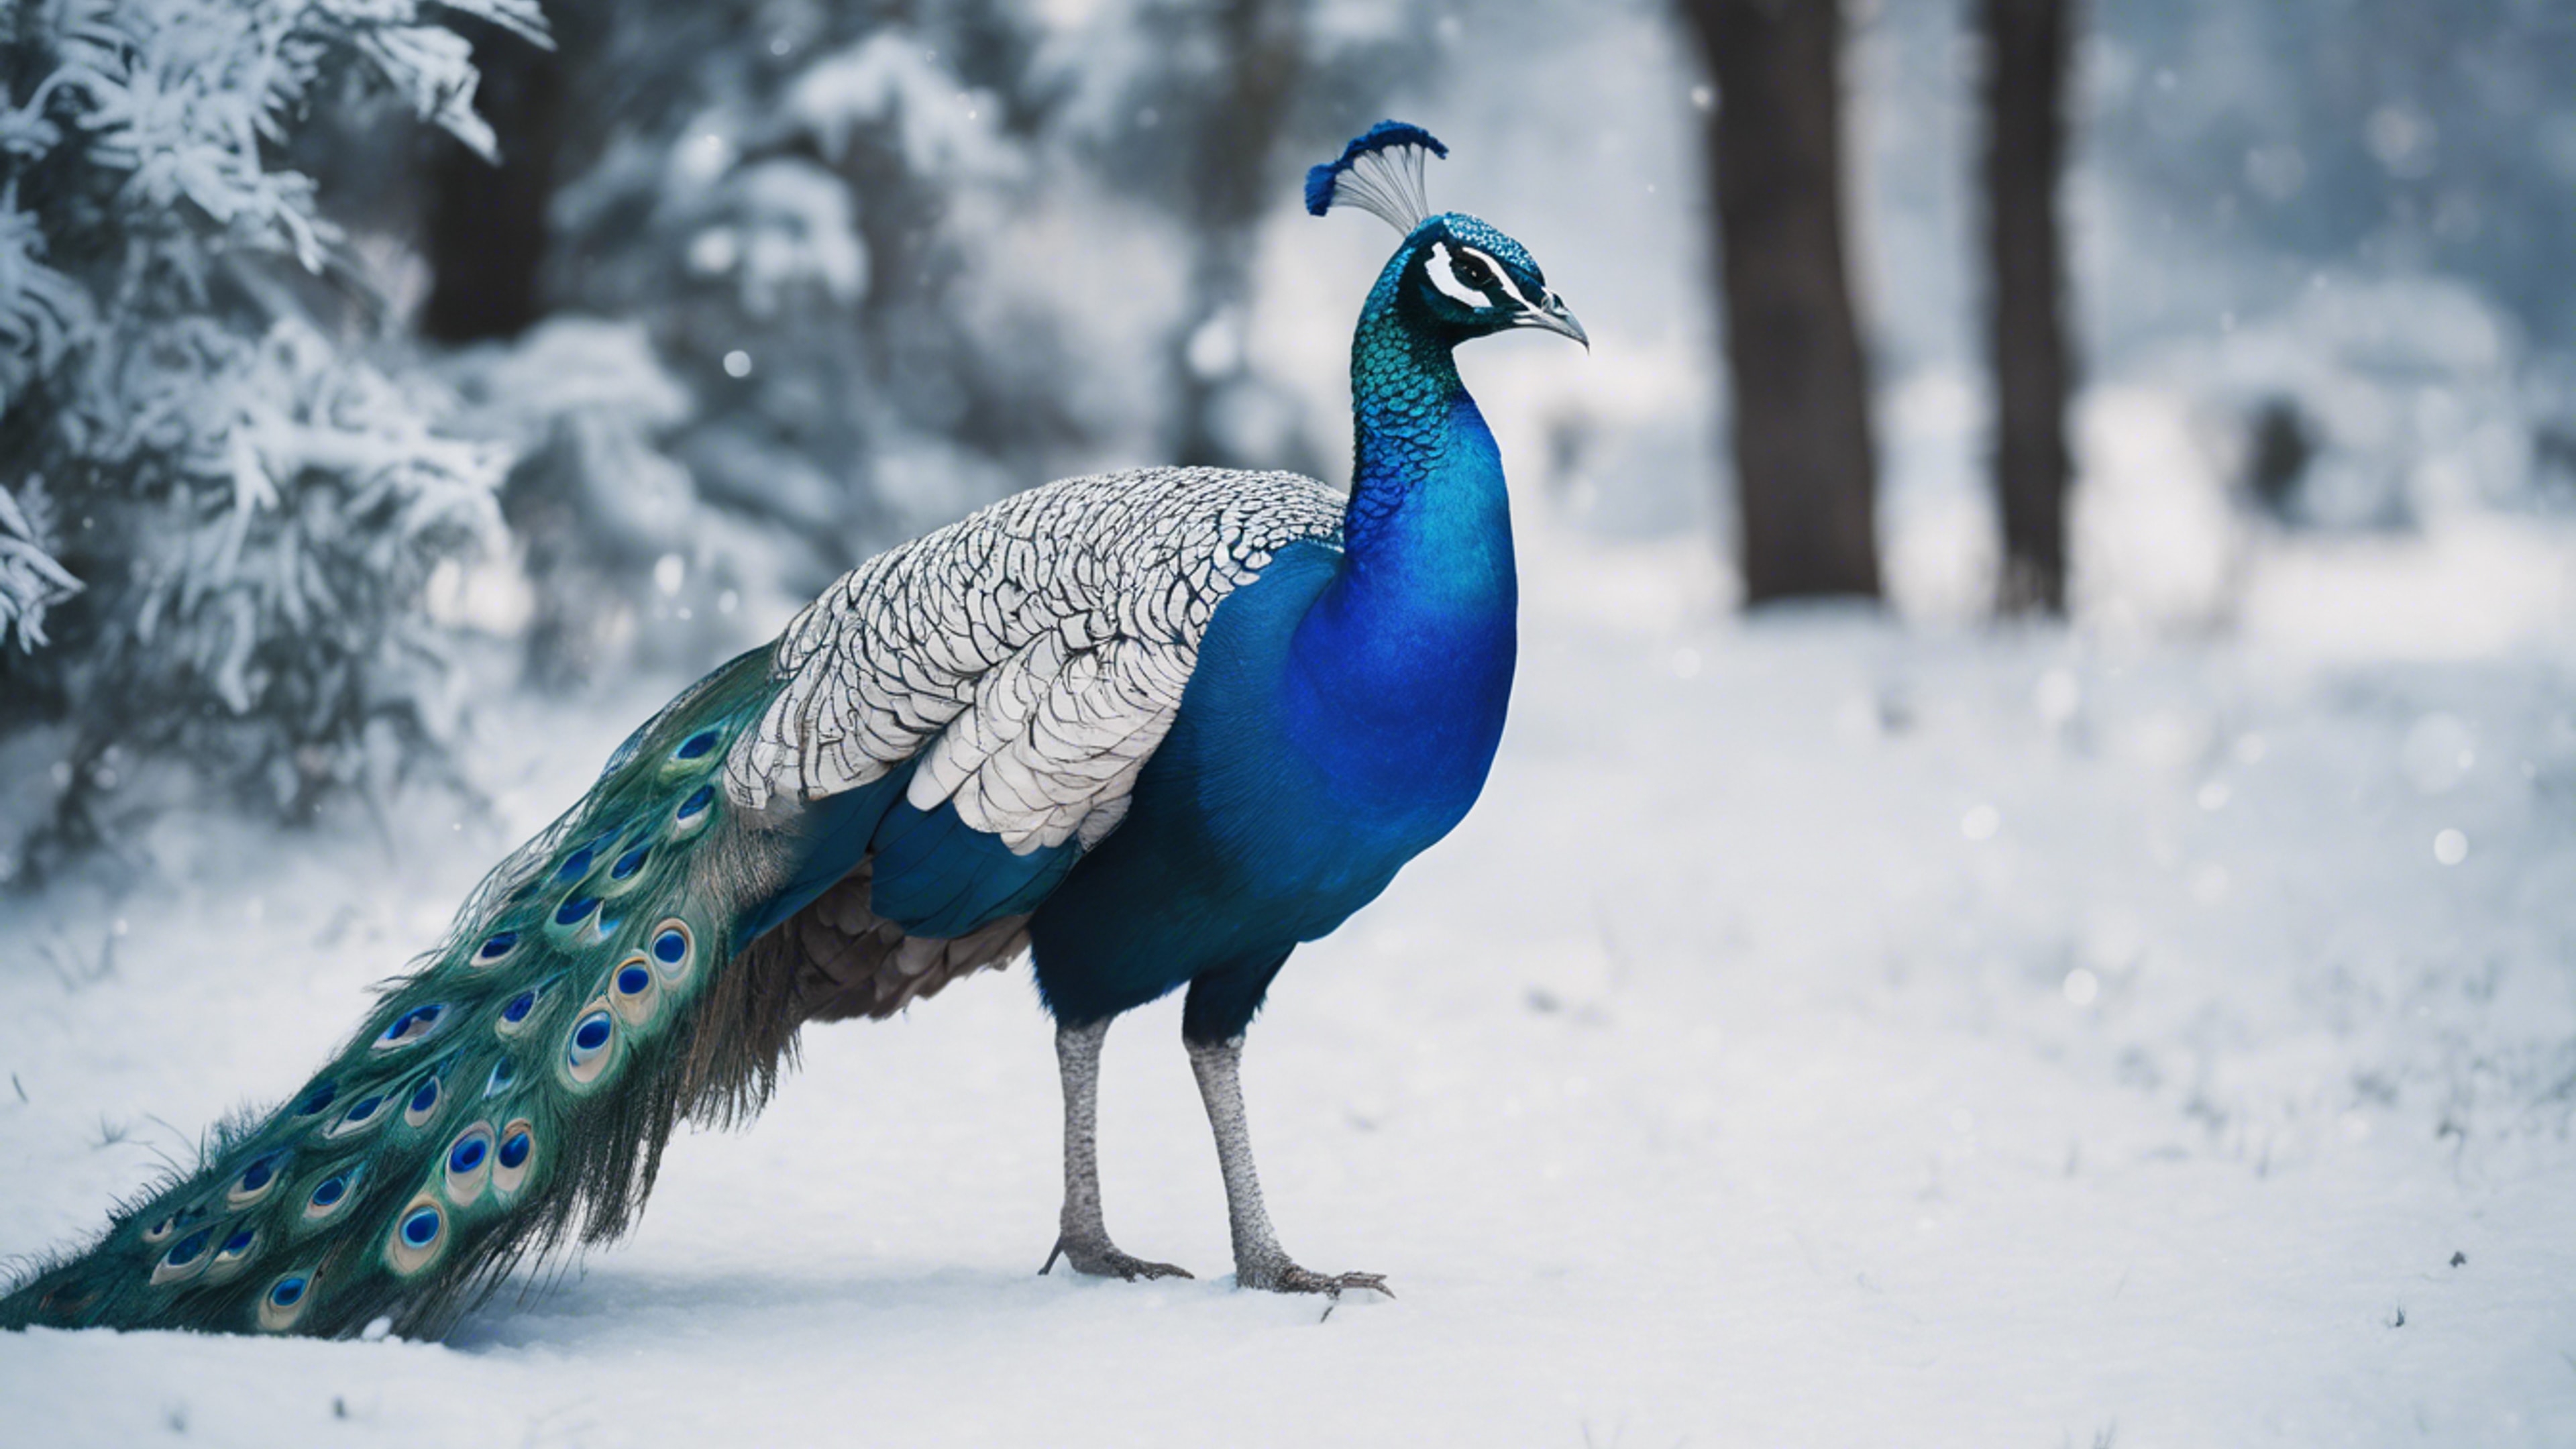 An azure blue peacock with a stunning white crest roaming in a winter wonderland. Шпалери[75d8e926bbf547baa433]